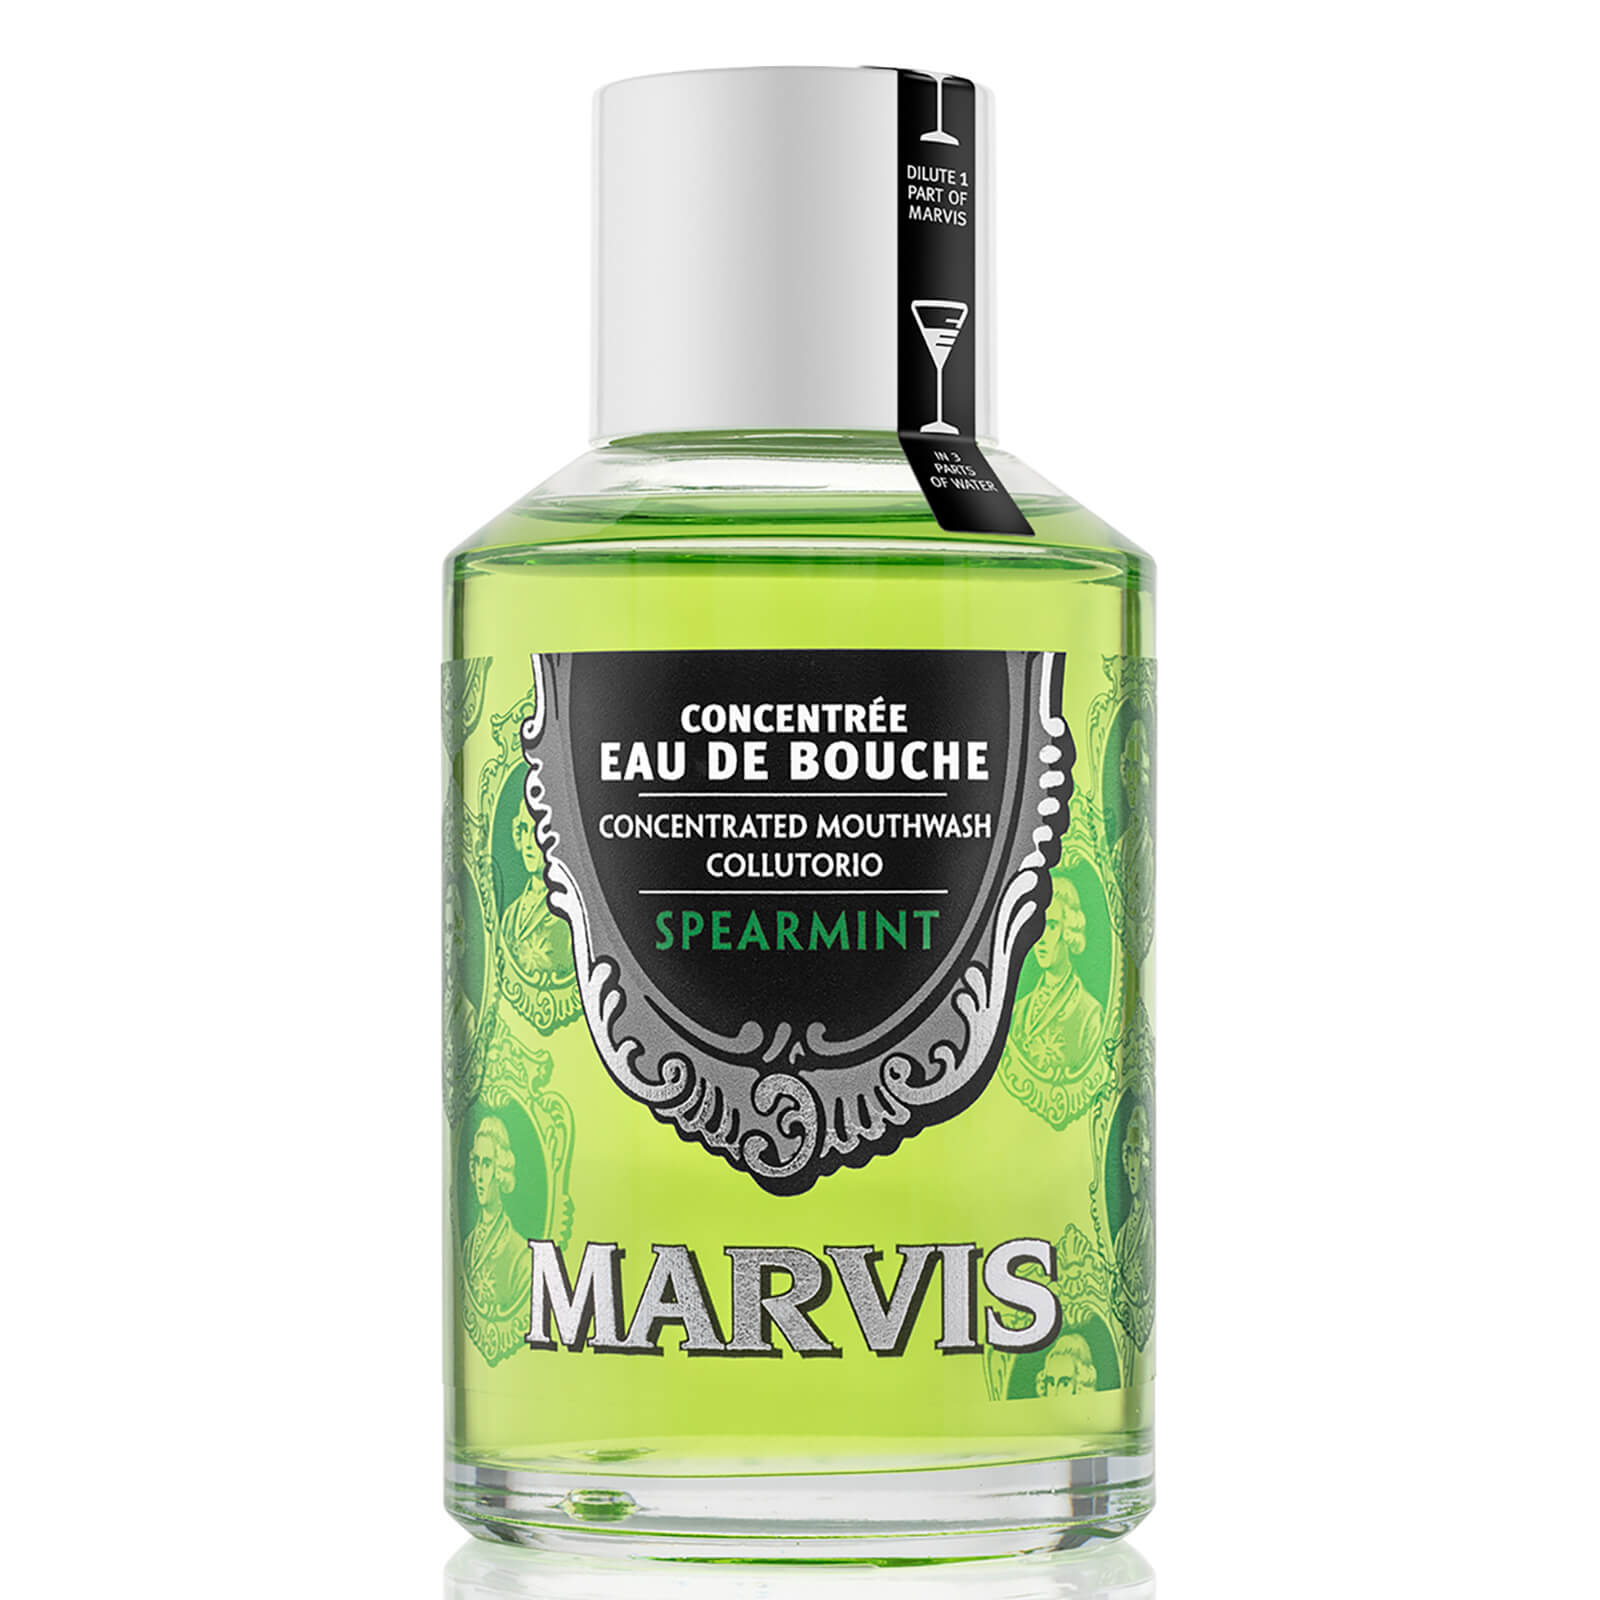 Marvis Concentrated Mouthwash Spearmint 120ml lookfantastic.com imagine